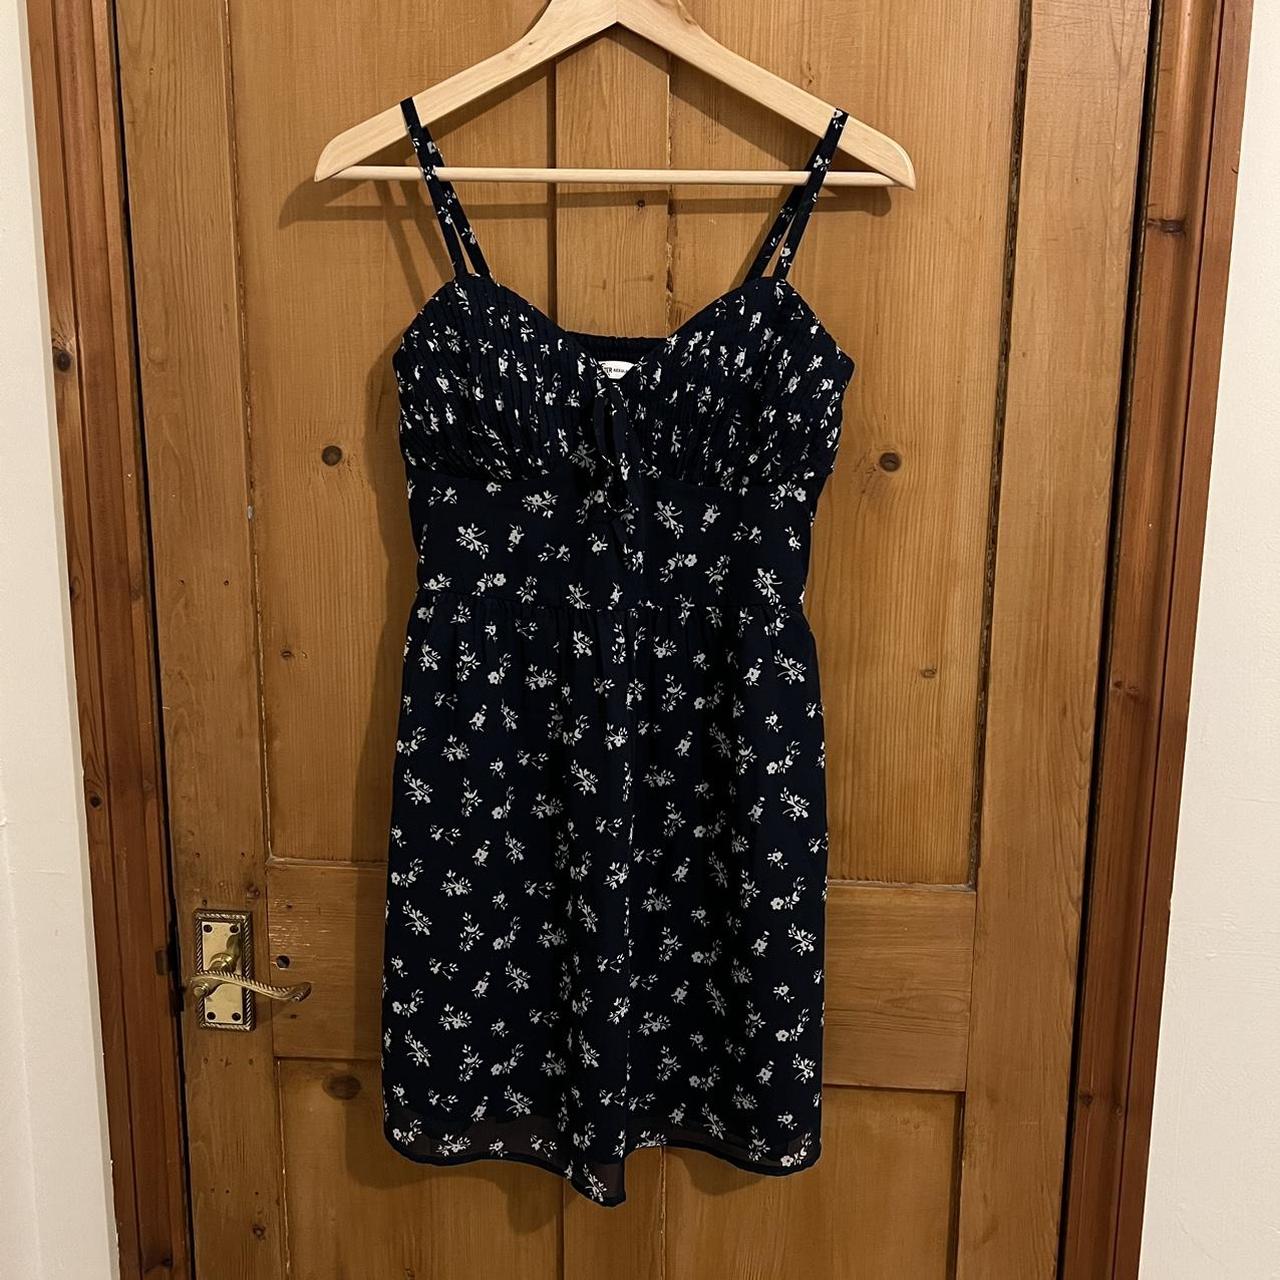 Hollister Navy Floral Dress Size S FREE Shipping No... - Depop